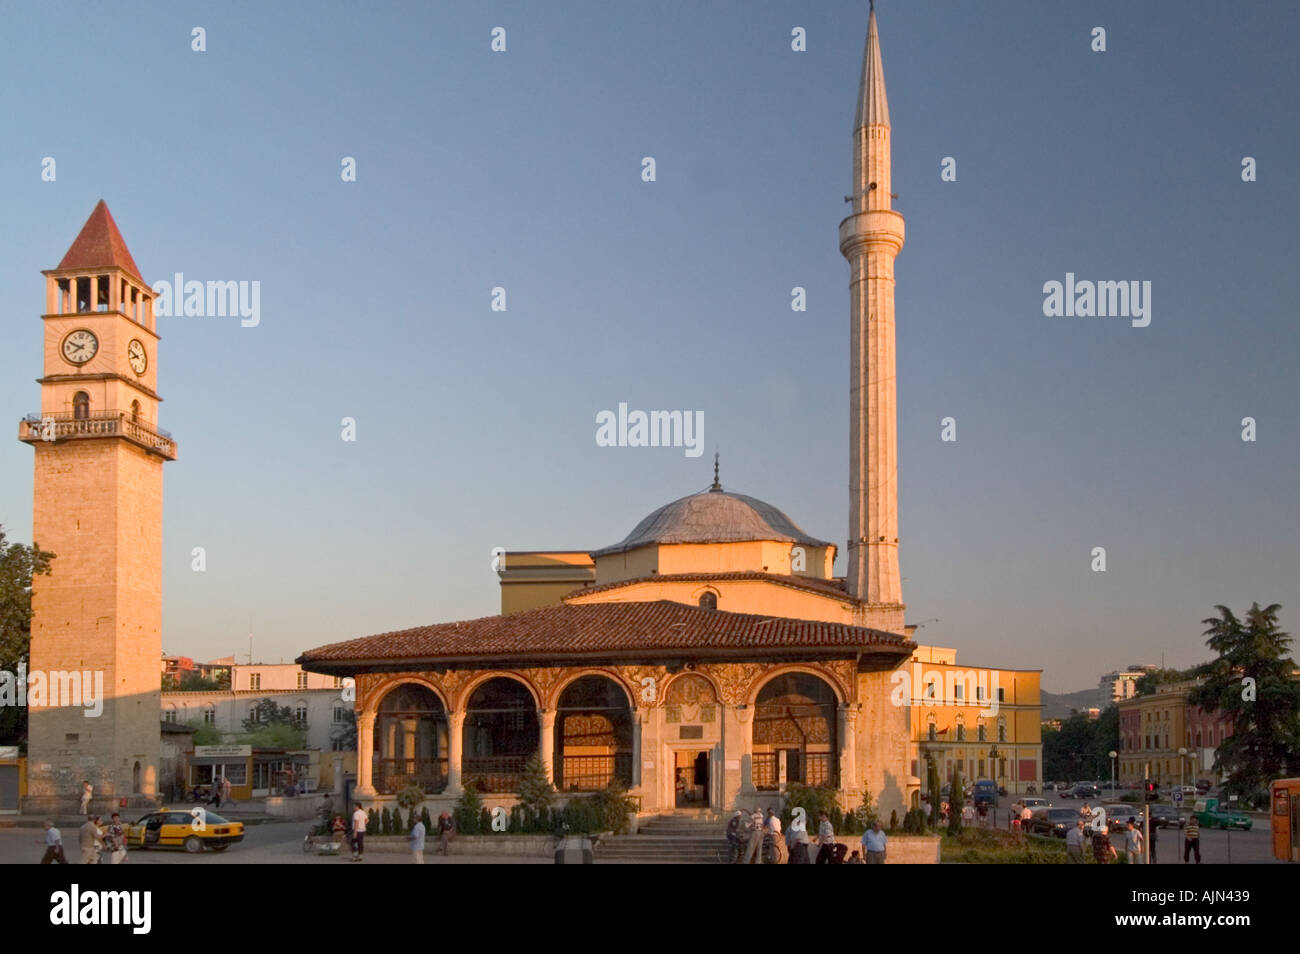 Ethem Bay Mosque High Resolution Stock Photography and Images - Alamy